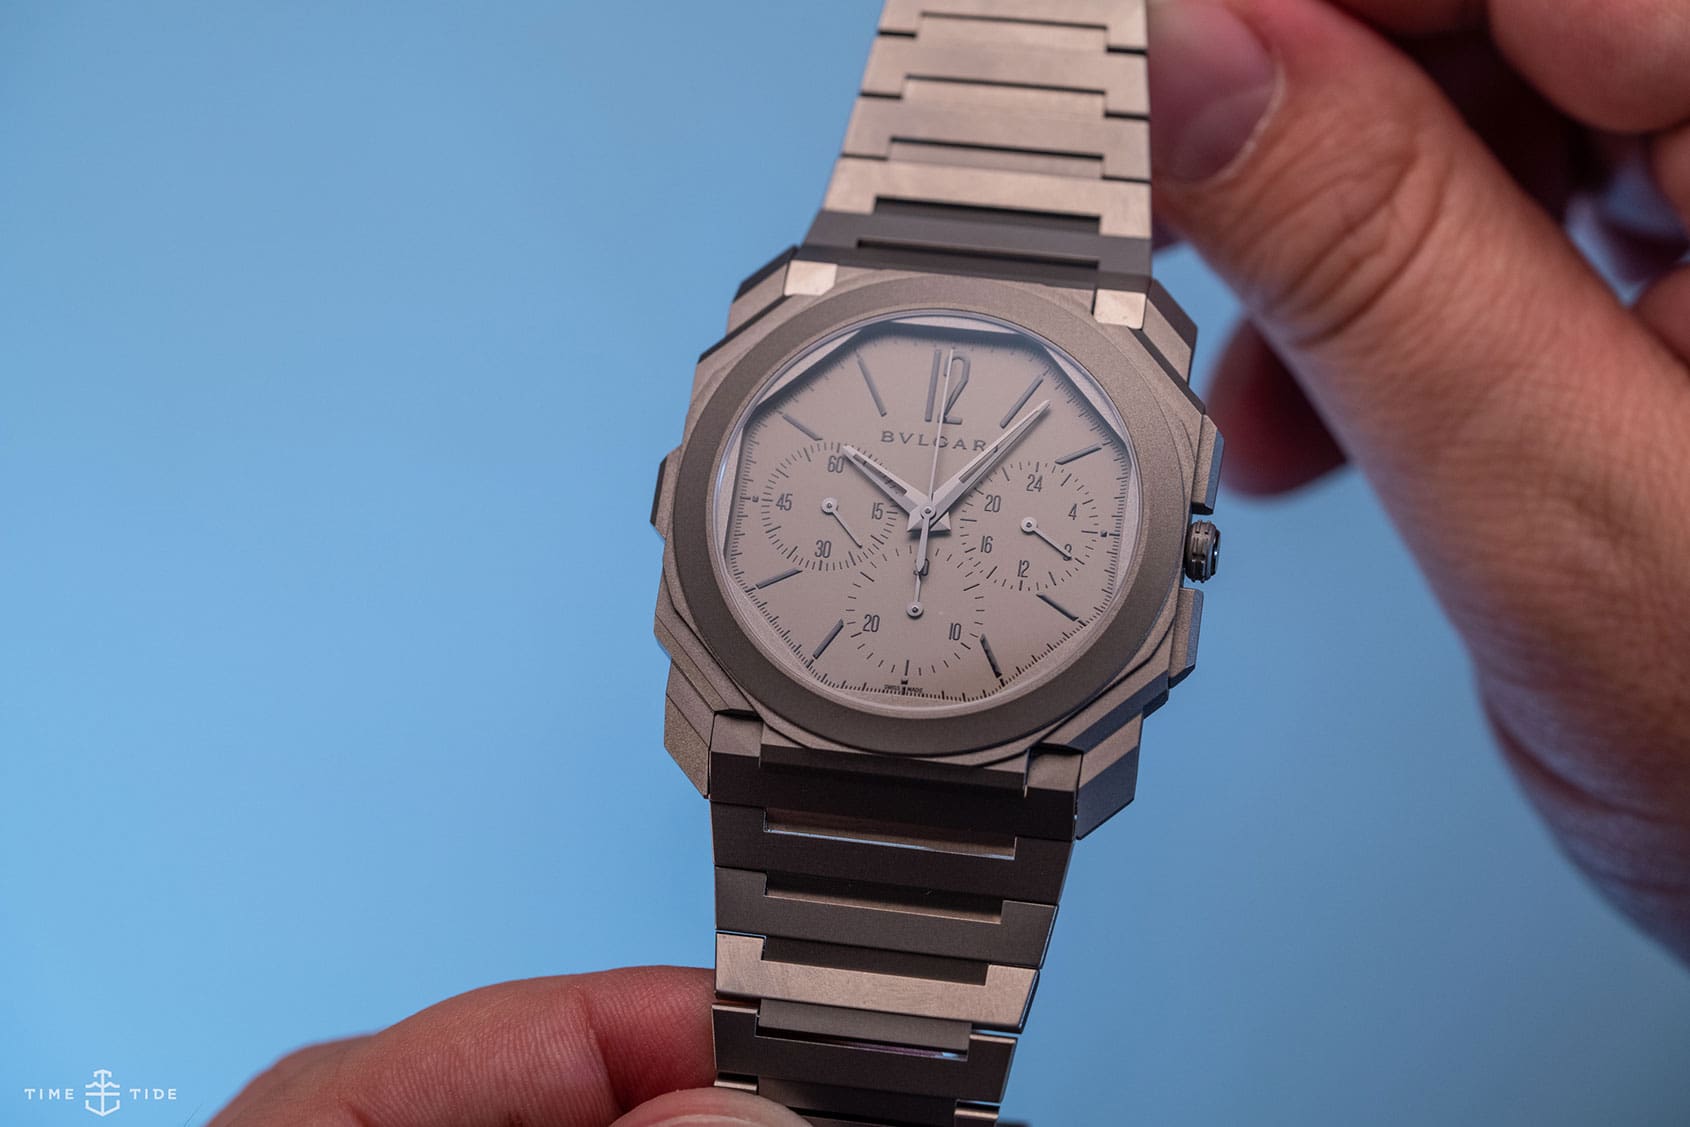 VIDEO: Andrew’s top 3 Basel 2019 watches between $10,000 and $35,000 inc. Zenith, Bulgari and Rolex